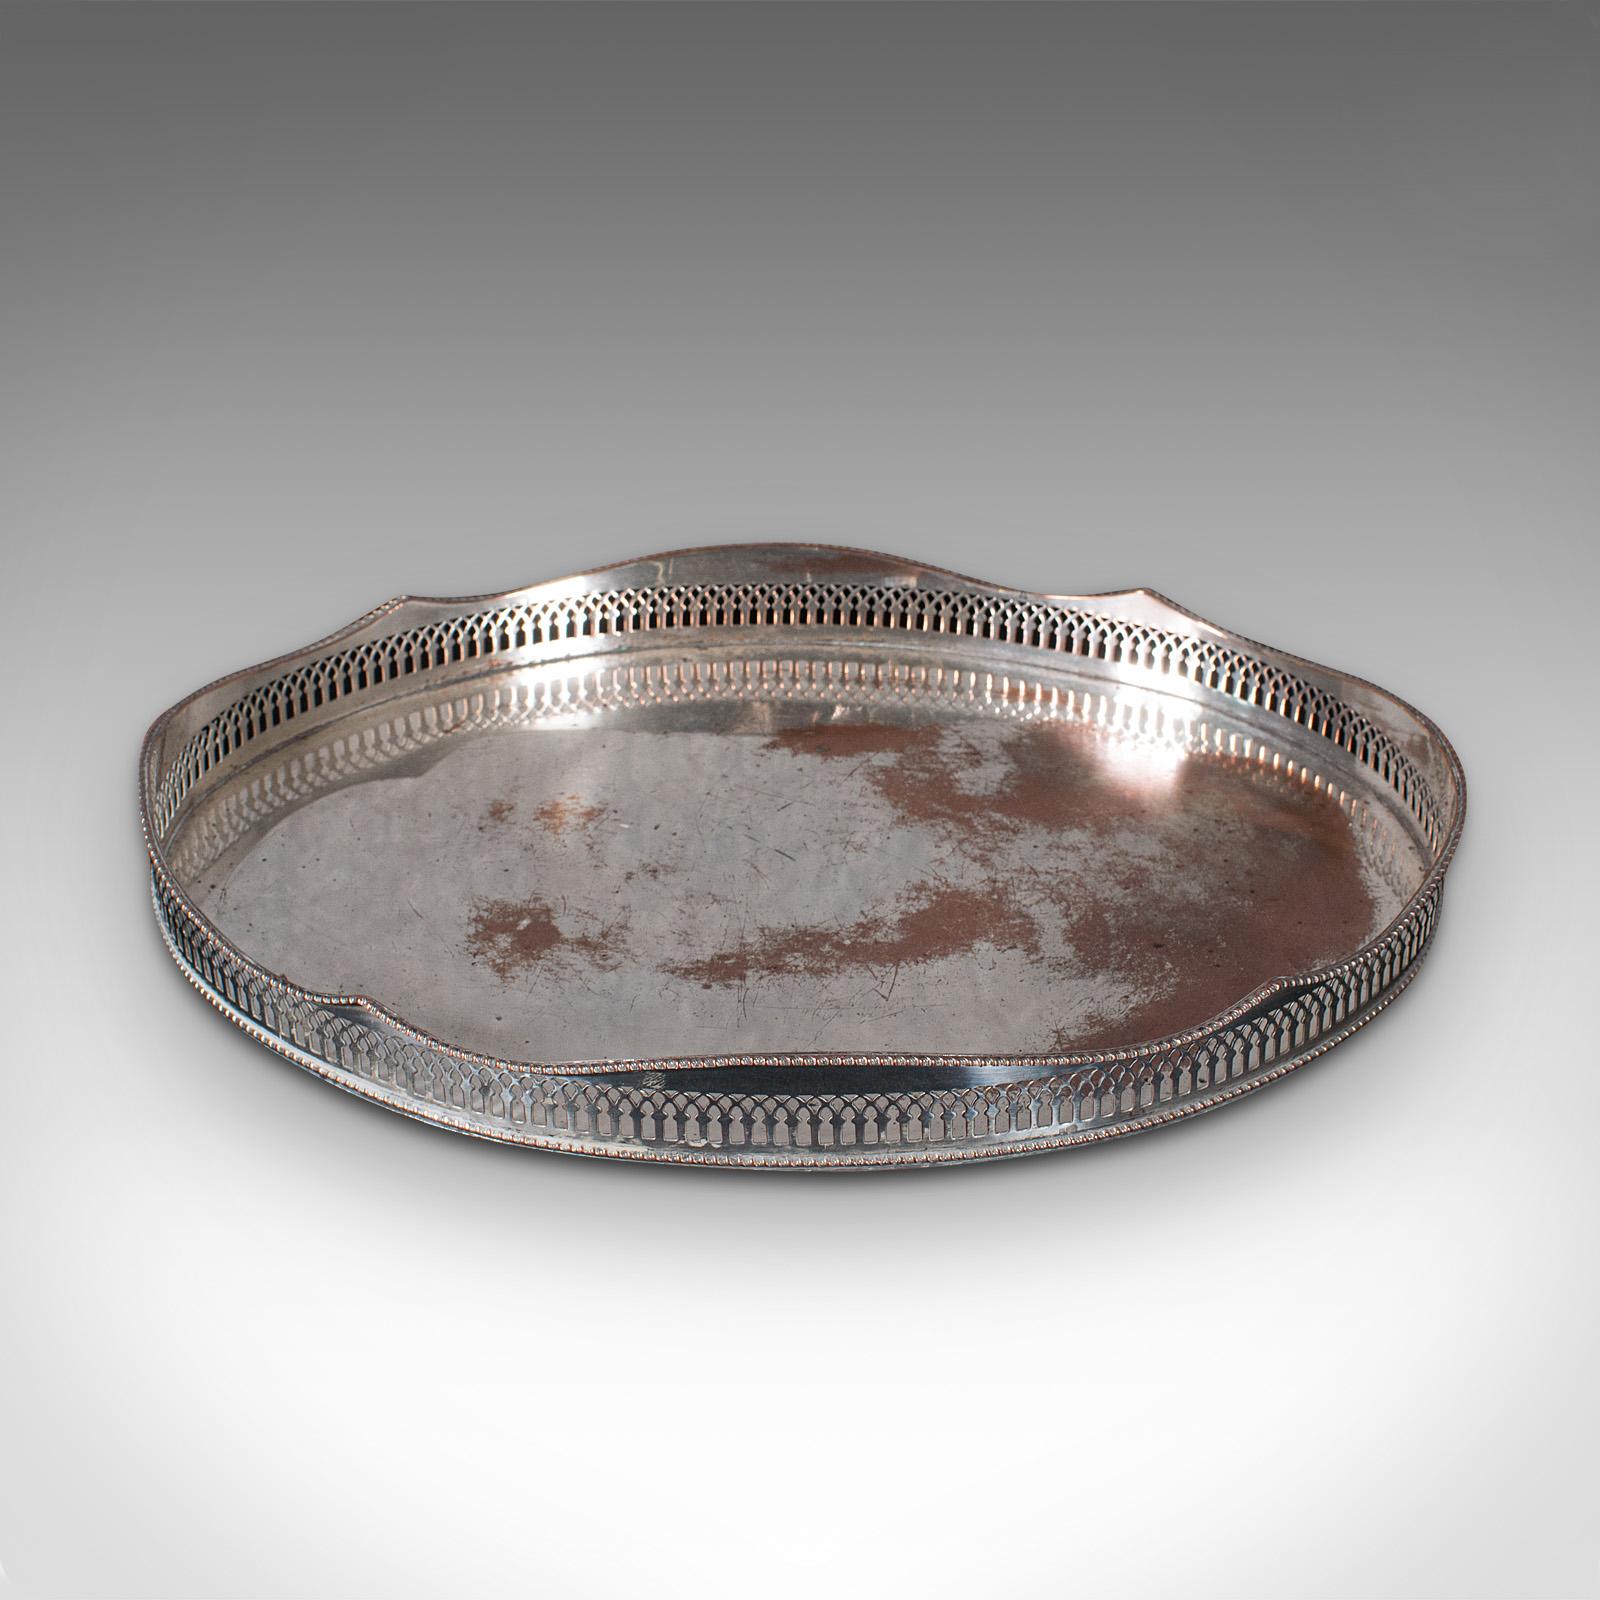 This is a vintage decorative serving tray. An English, silver plate afternoon tea oval platter, dating to the early 20th century, circa 1930.

Charming oval service tray with distinctive appearance
Displays a desirable aged patina